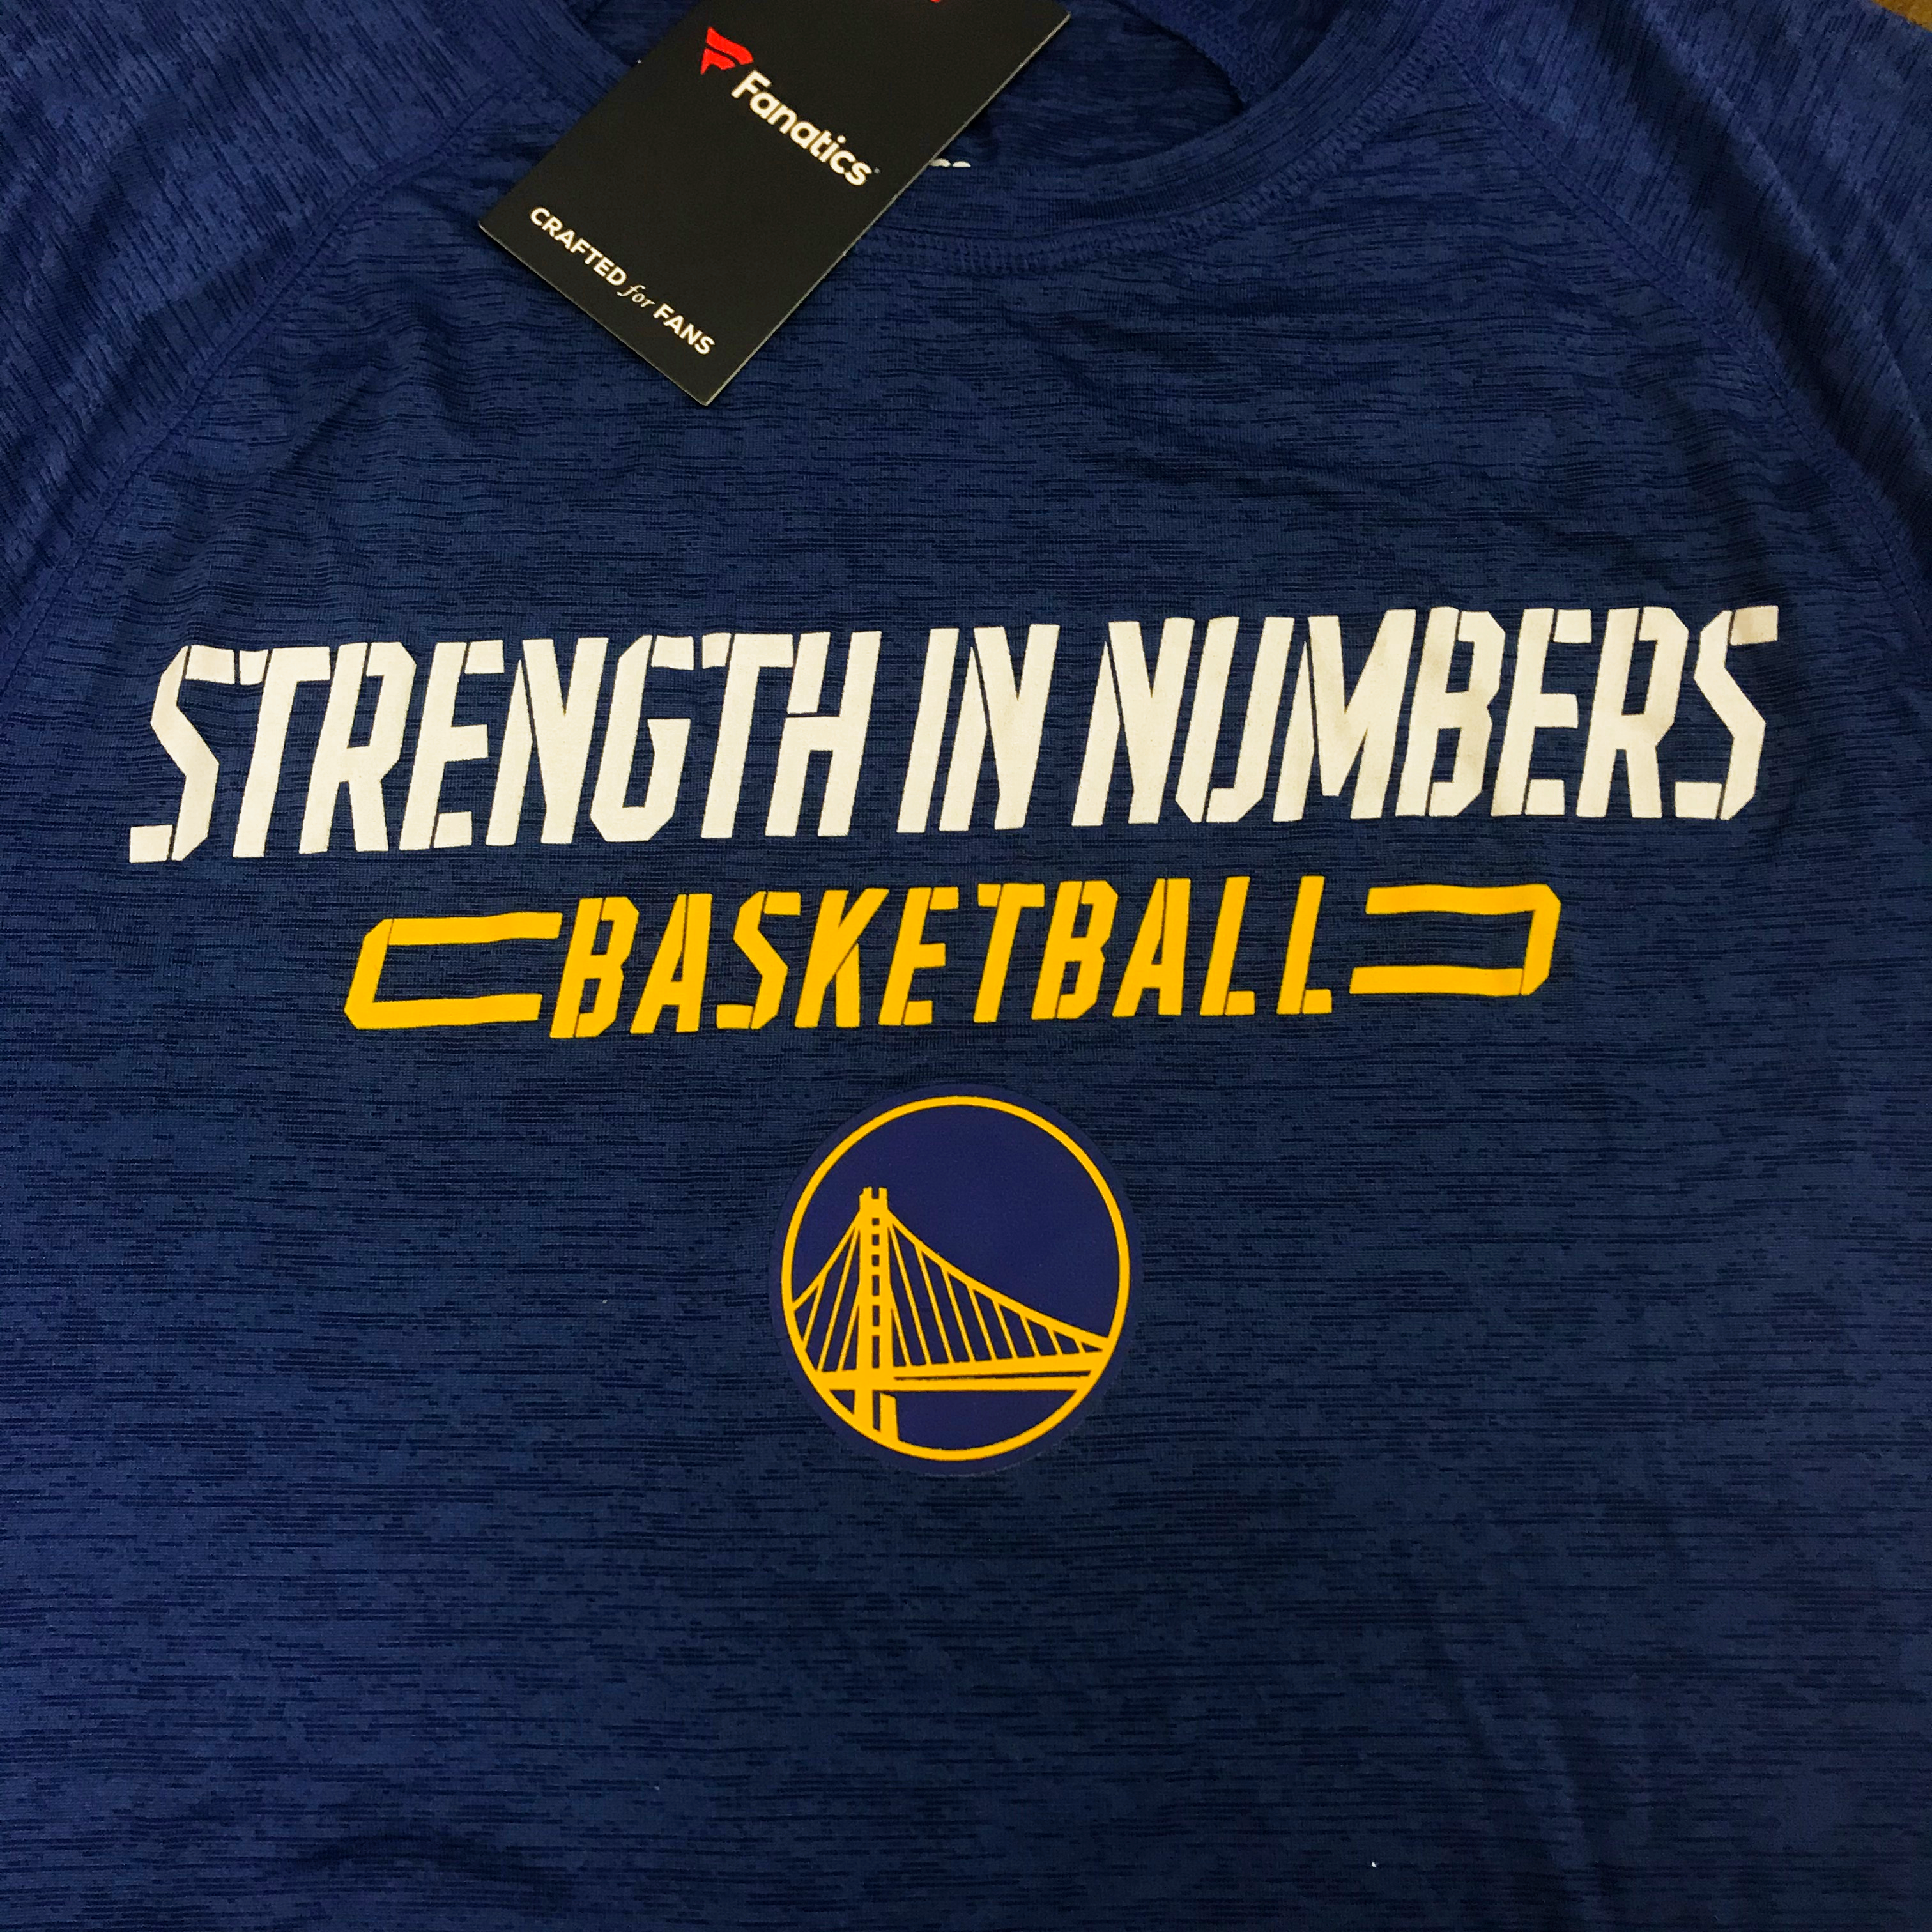 FANATICS Golden State Warriors "STRENGTH IN NUMBERS" HEATHER T-SHIRT-BLUE